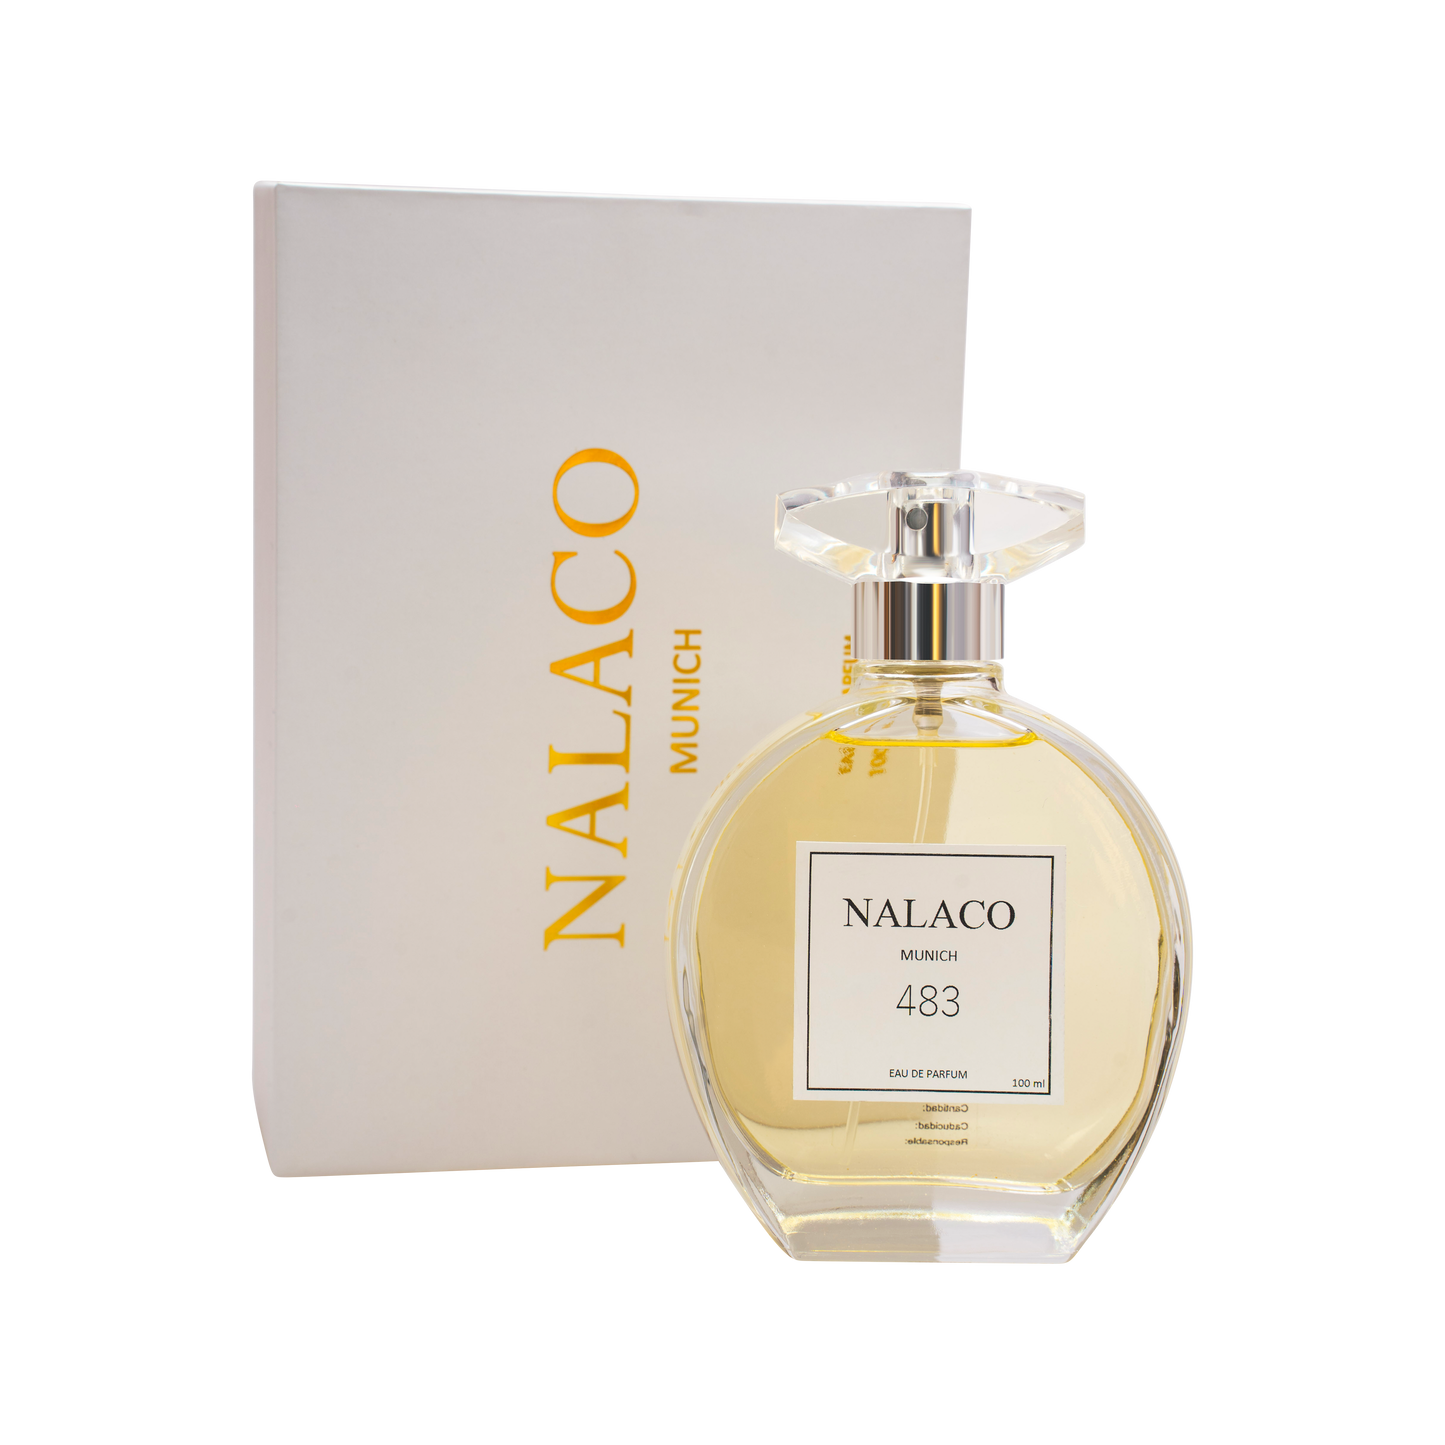 Nalaco No. 483 inspired by Zadig & Voltaire This is Her